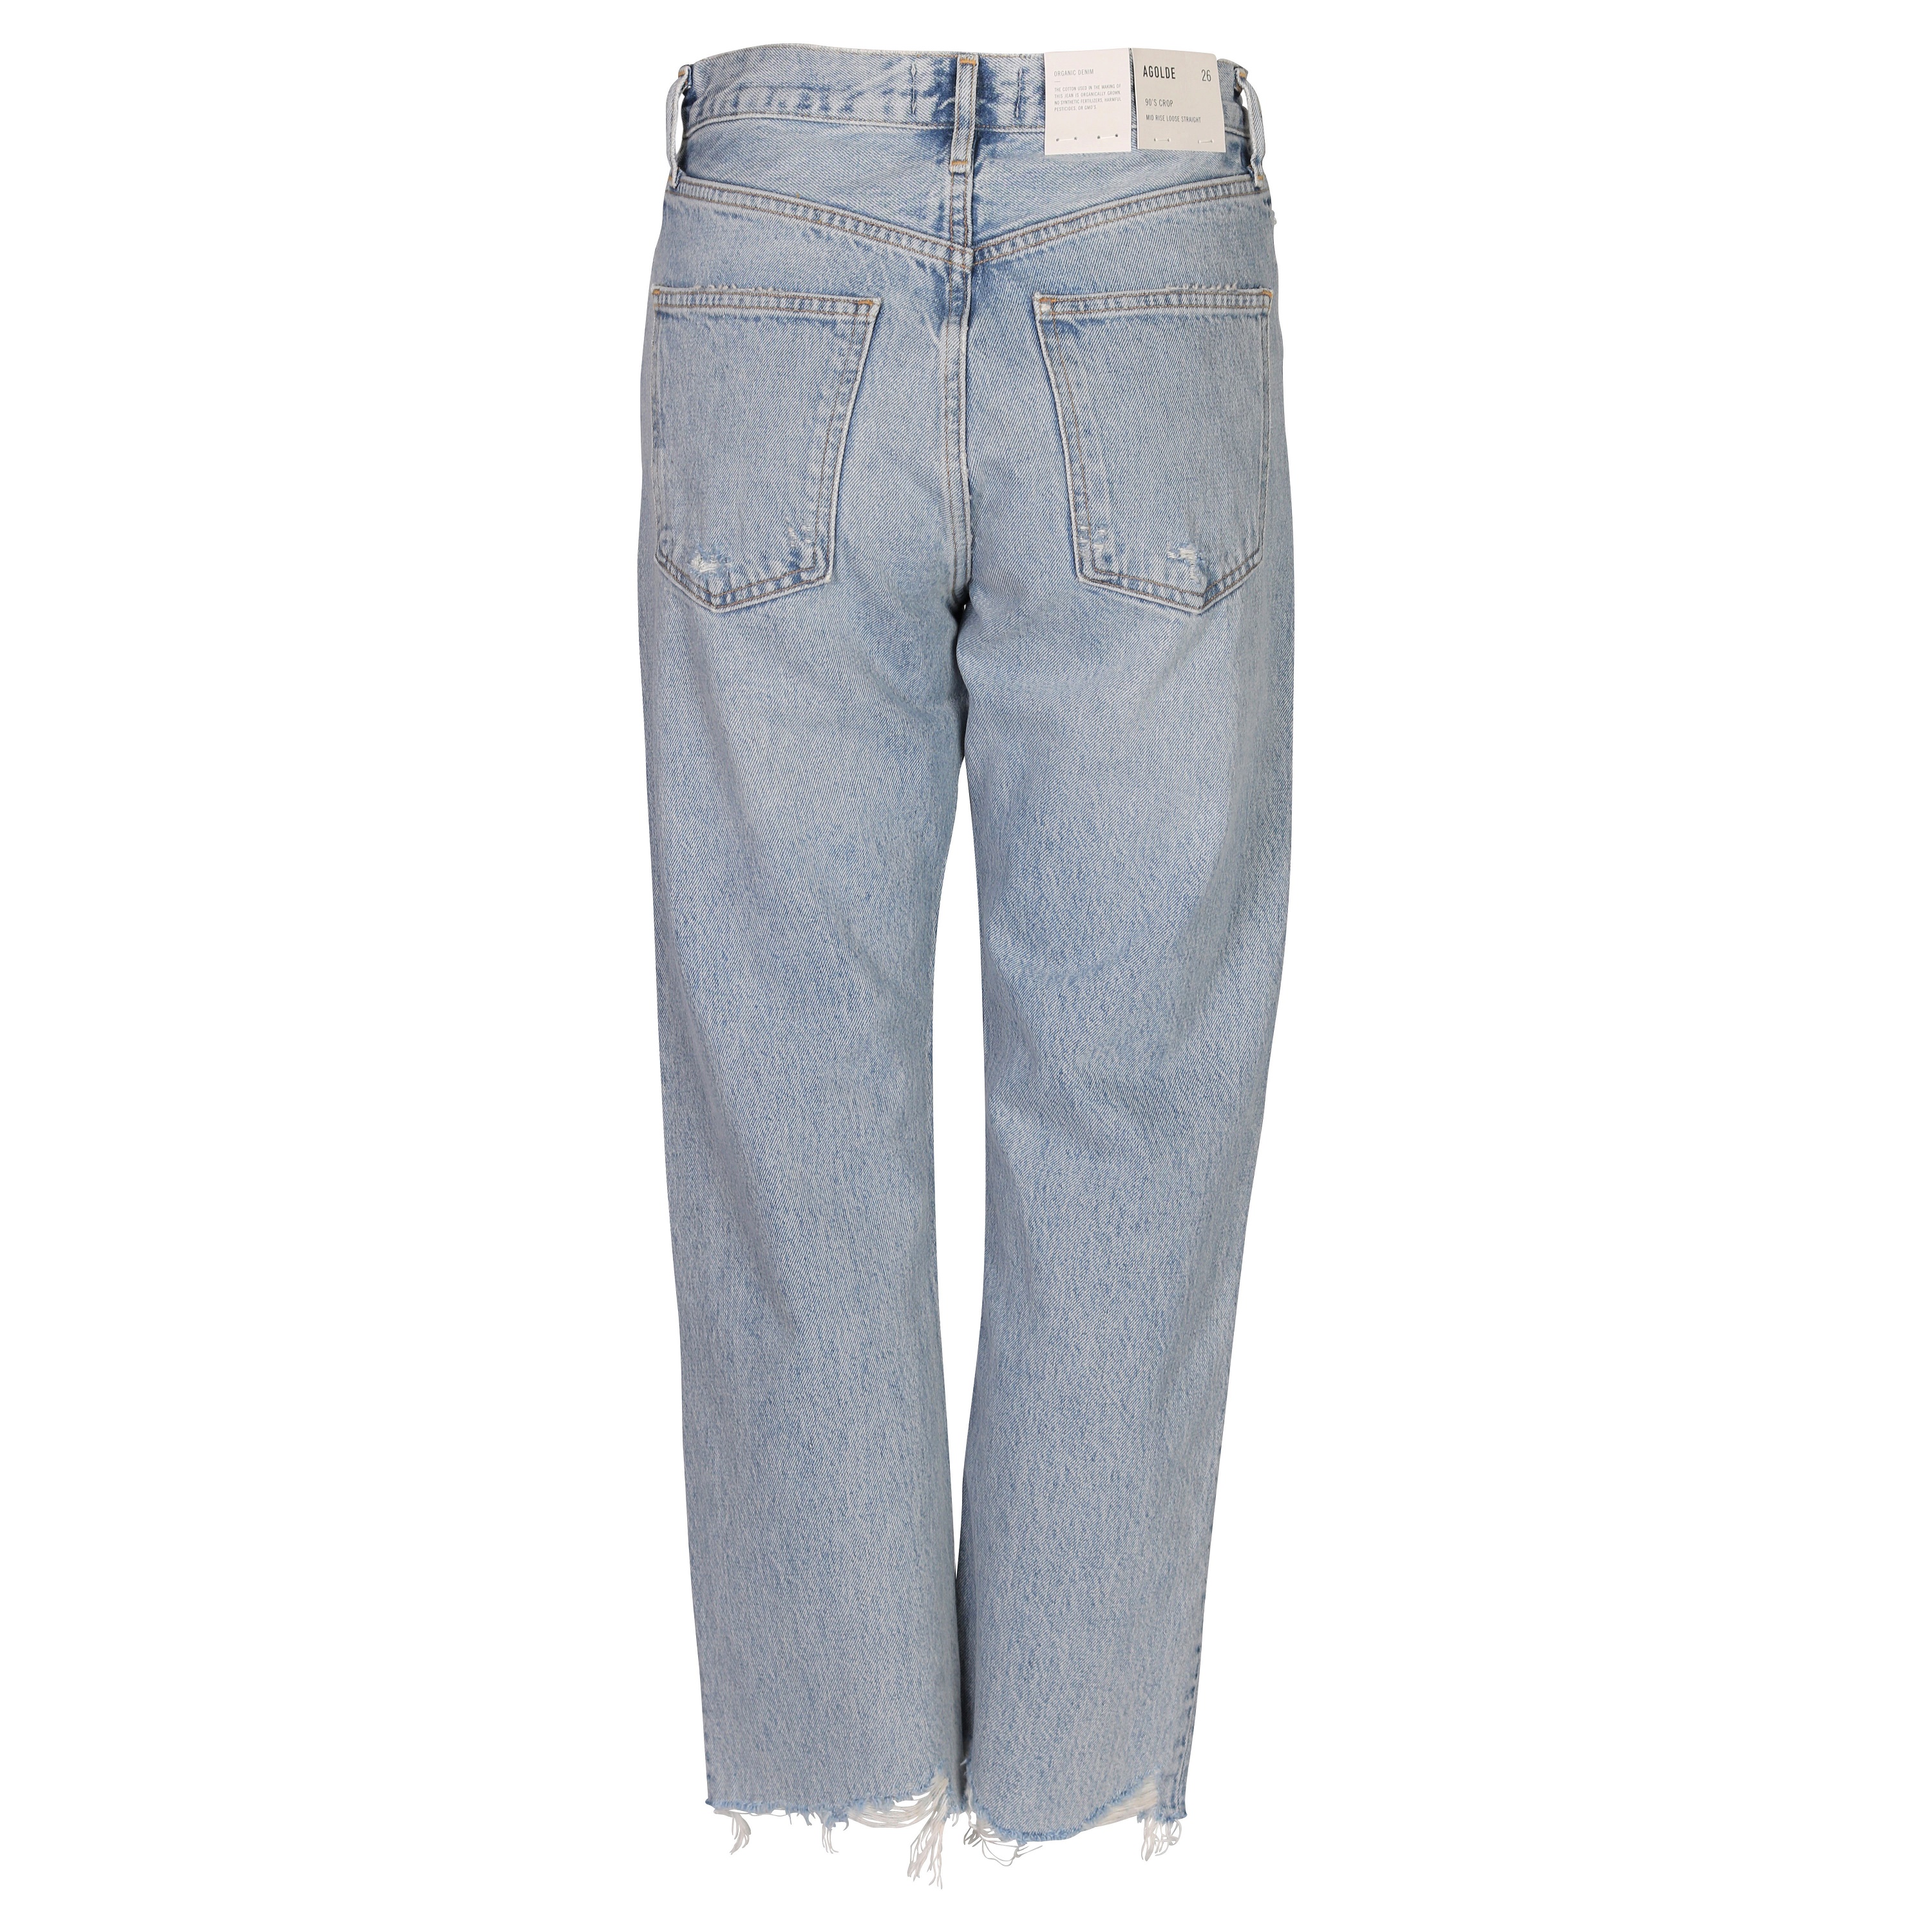 Agolde Jeans 90s Cropped in Nerve Washing W 24